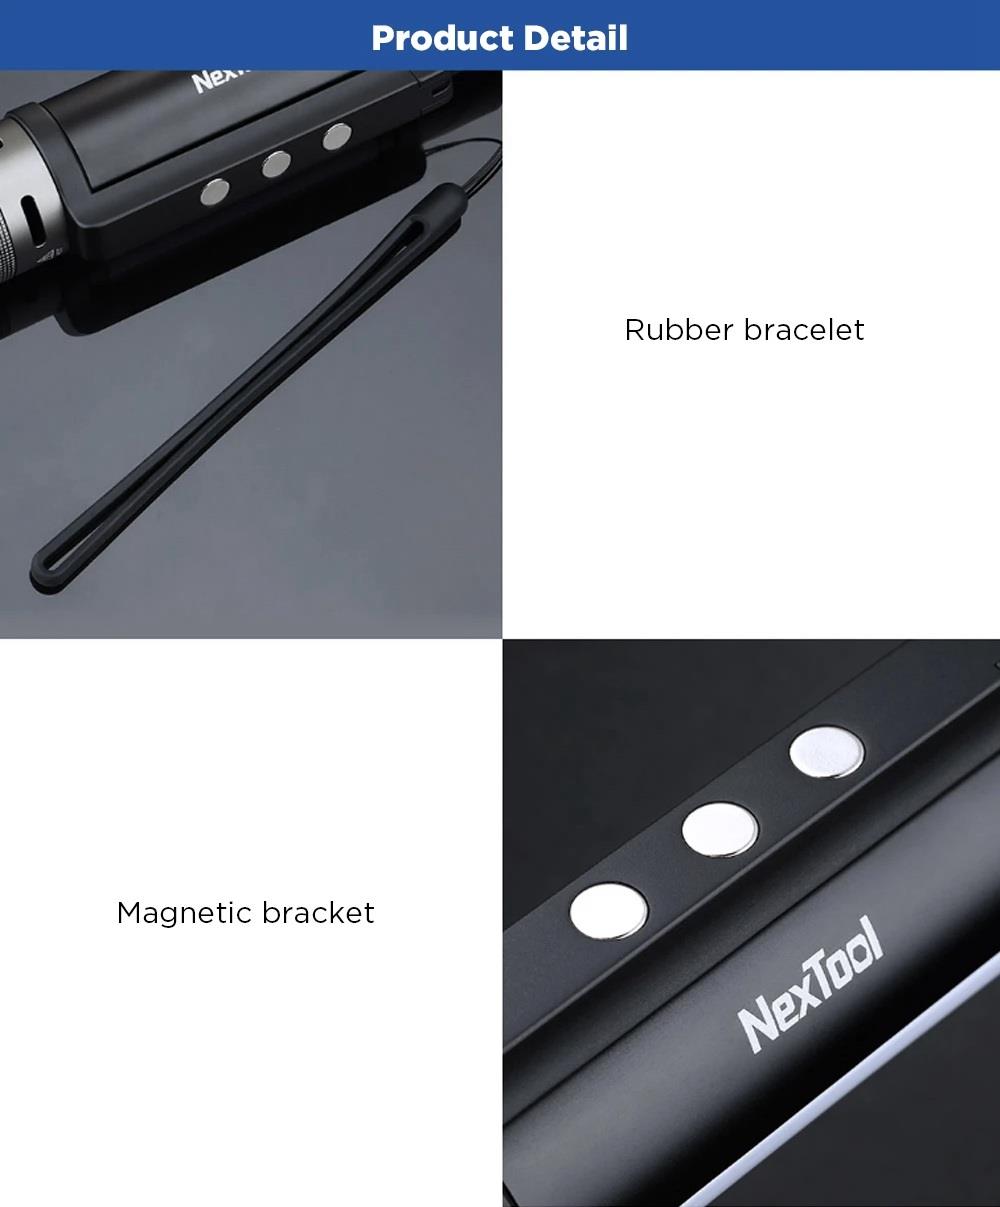 Nextool Outdoor Portable 6-in-1 LED Flashlight 1000 Lumens Lens Telescopic Focusing One-click Alert USB Charging IPX4 Waterproof From Xiaomi Youpin - Black